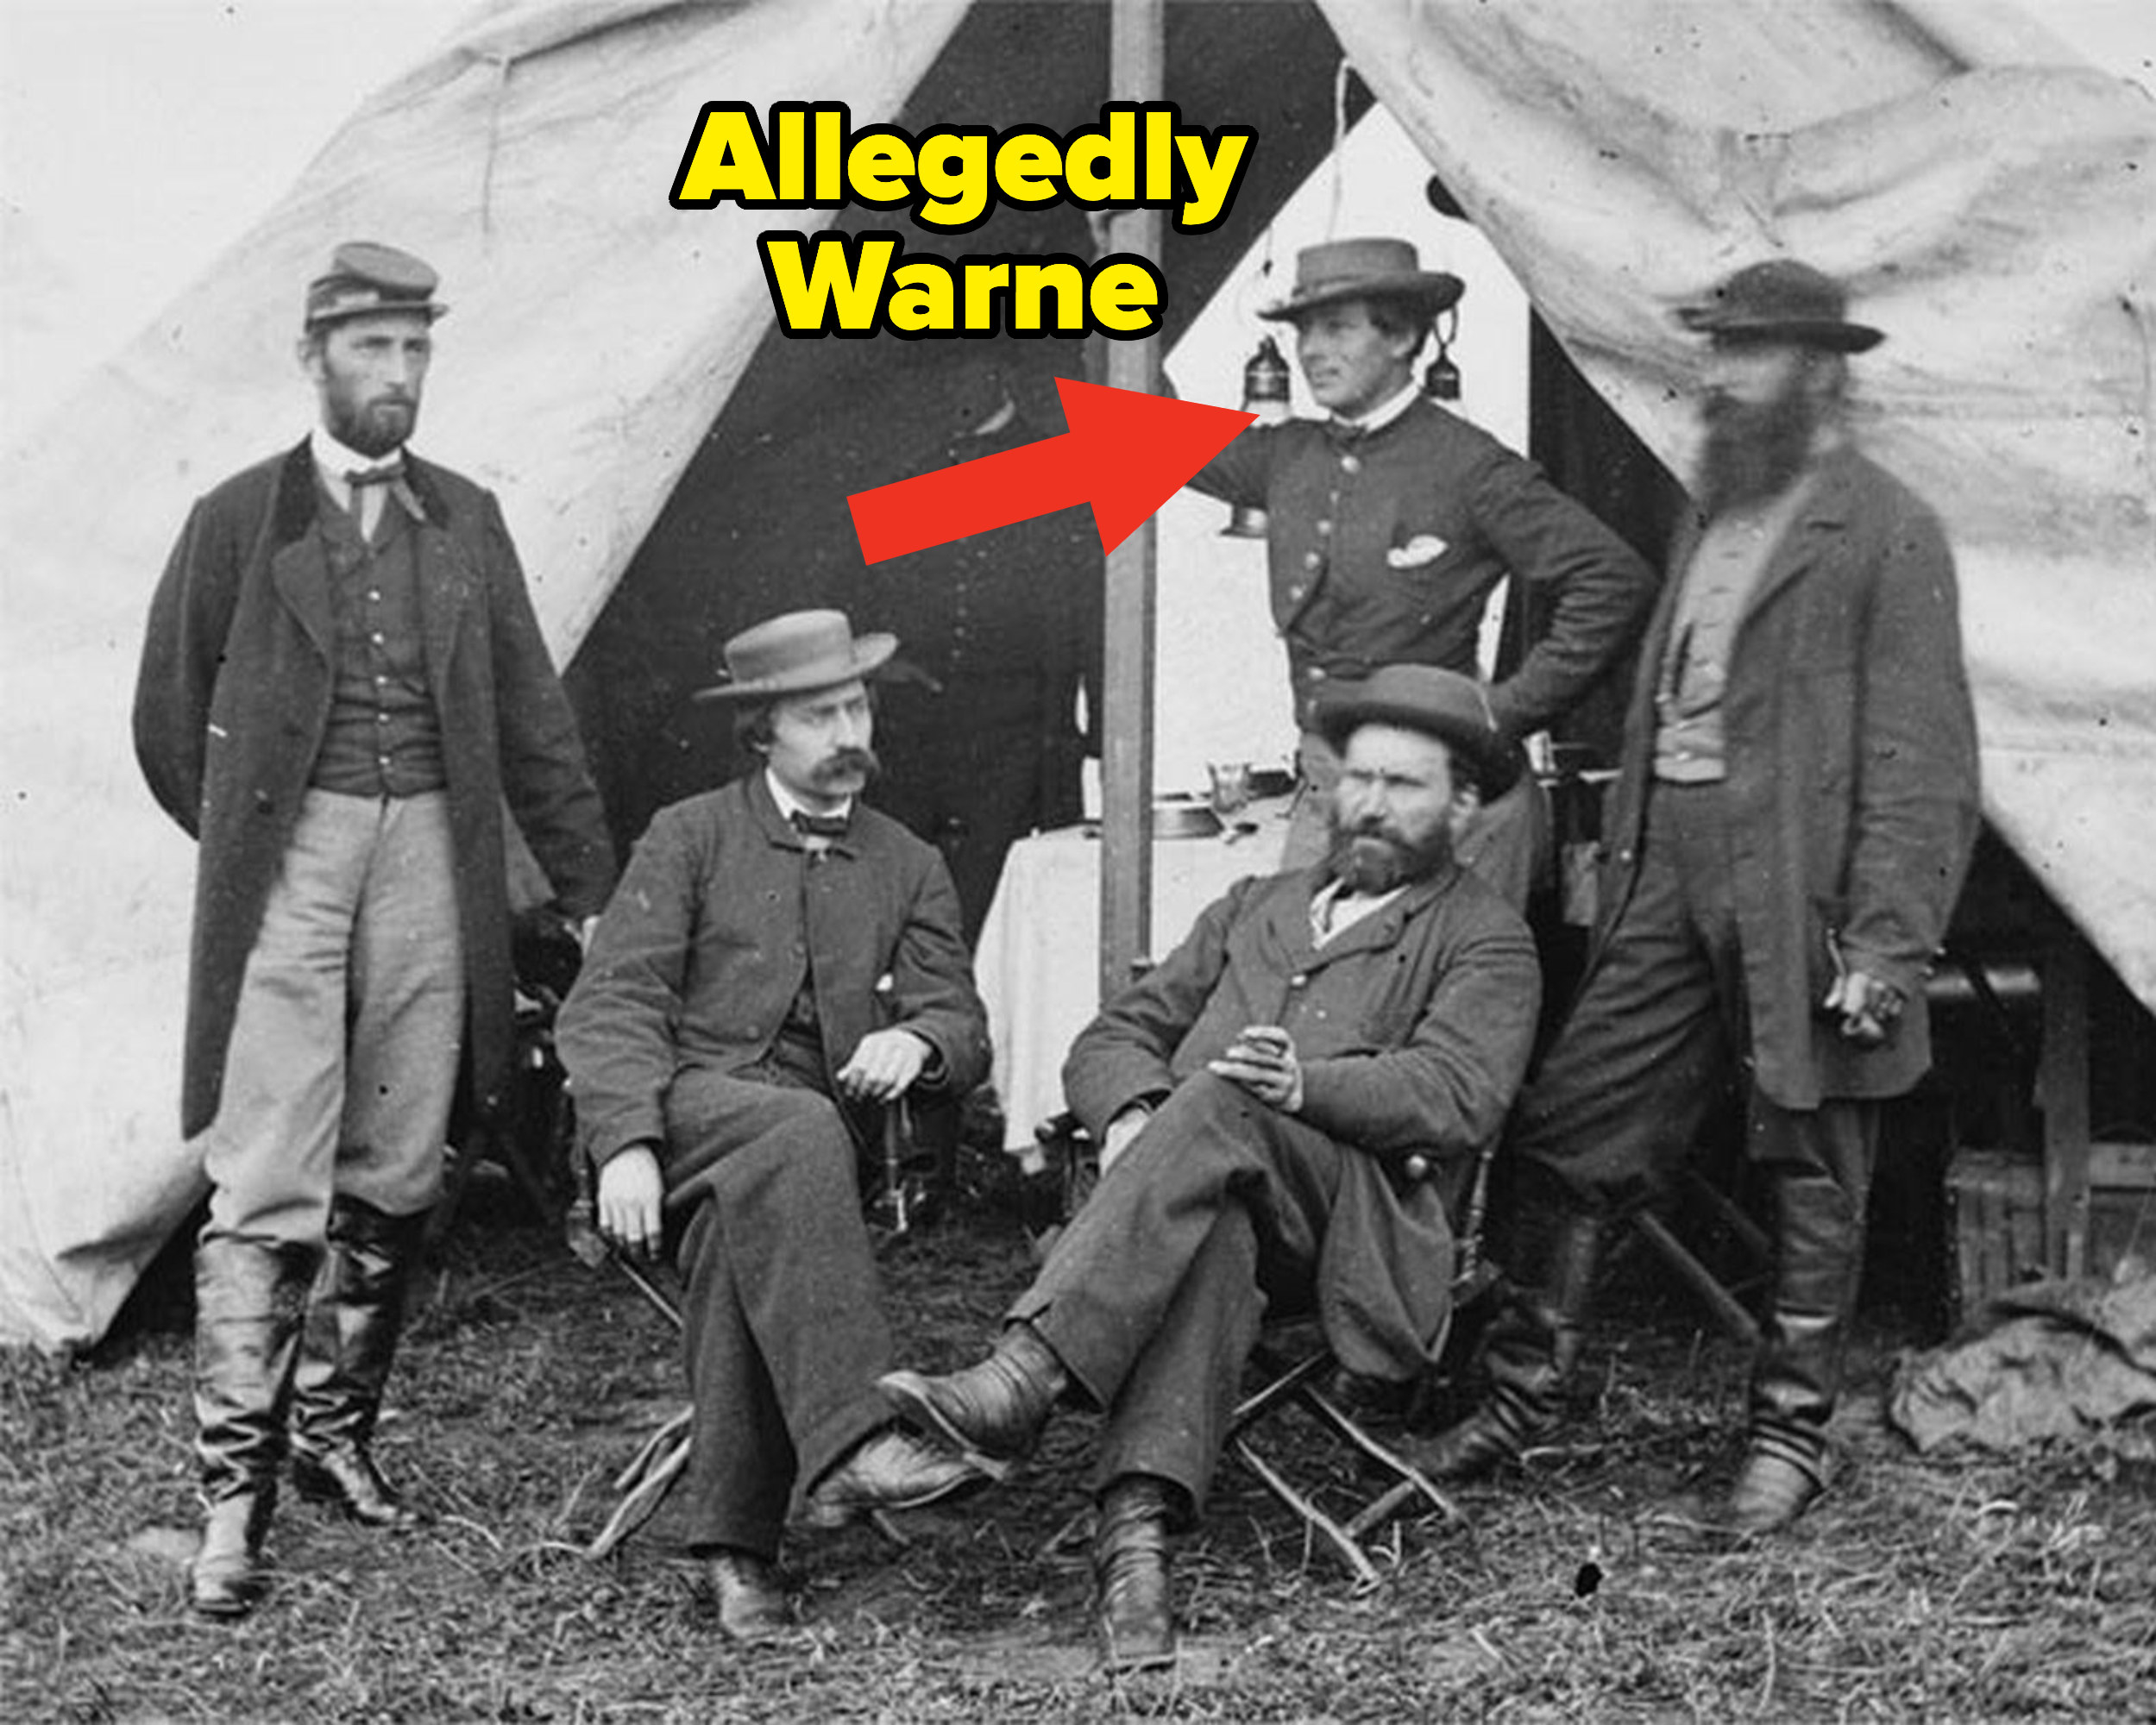 old photo of a group of mean outside a tent with an arrow pointing to one in the back that is allegedly warne in disguise